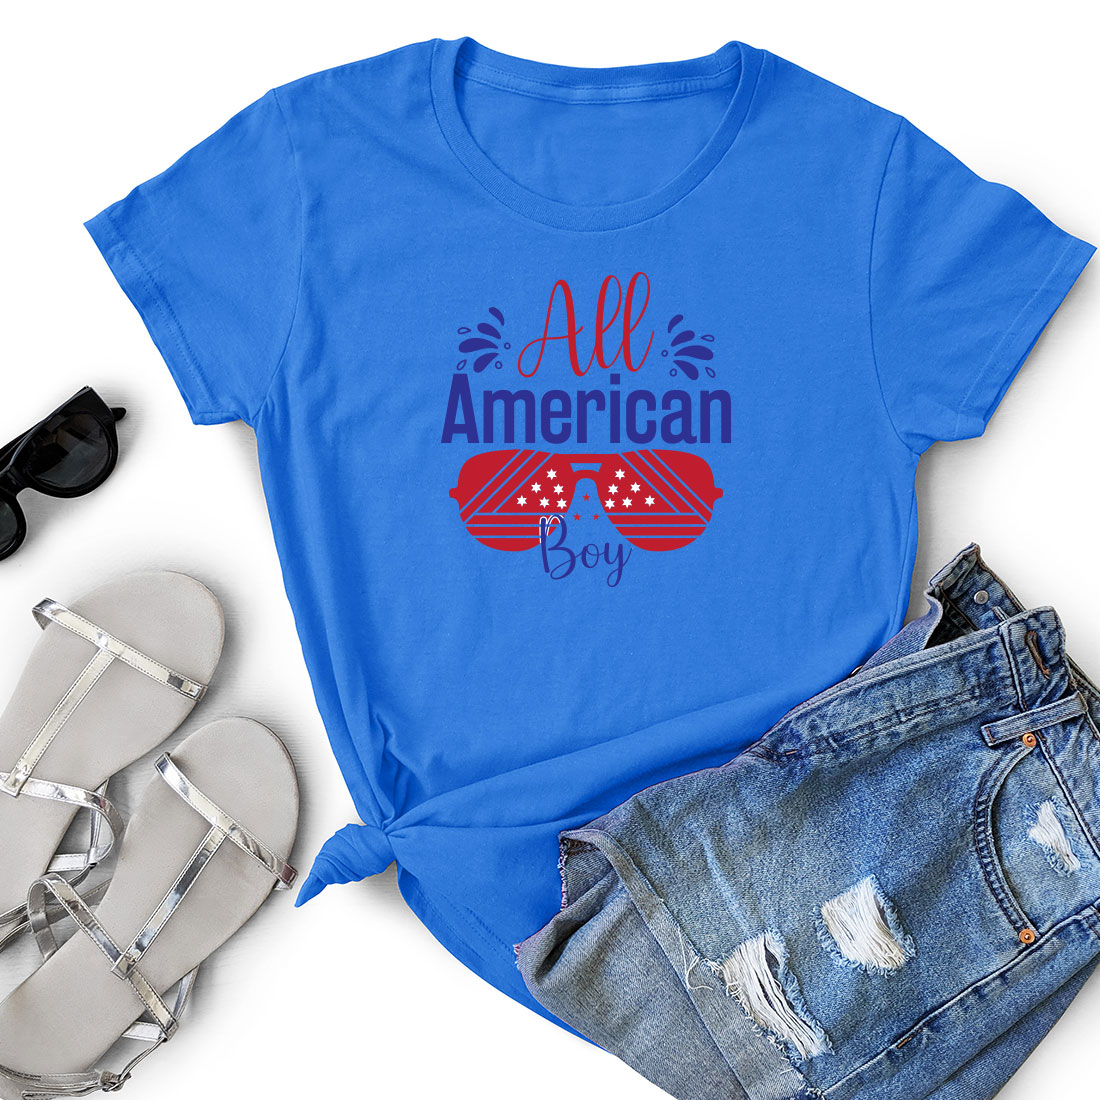 T - shirt that says all american with a pair of shorts.